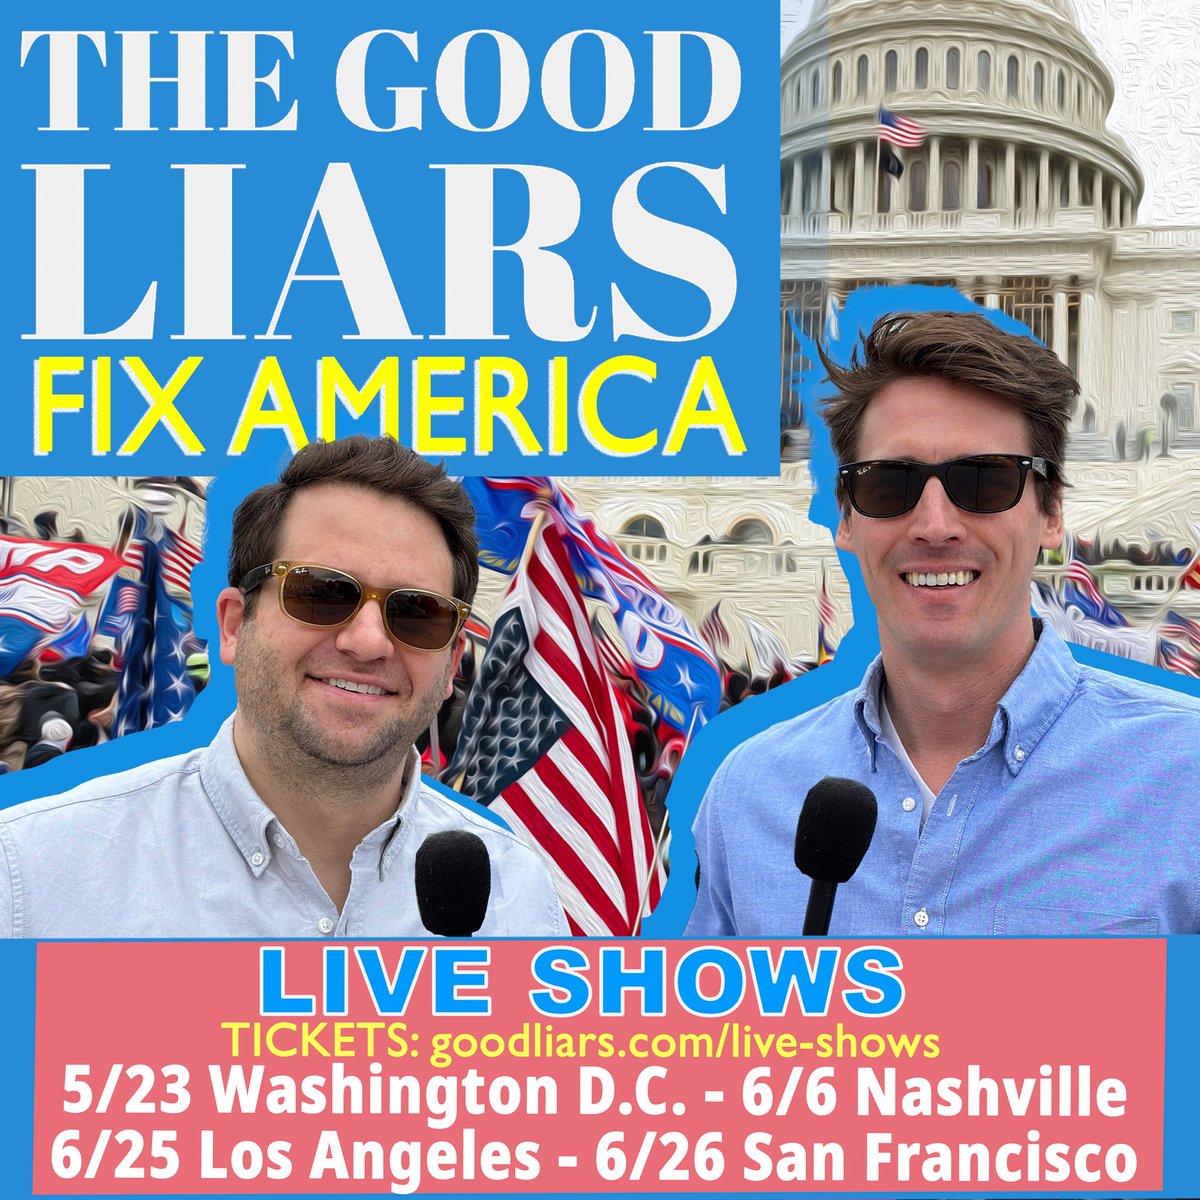 LIVE SHOWS coming up! 🎟️ Tickets goodliars.com/live-shows 🎟️